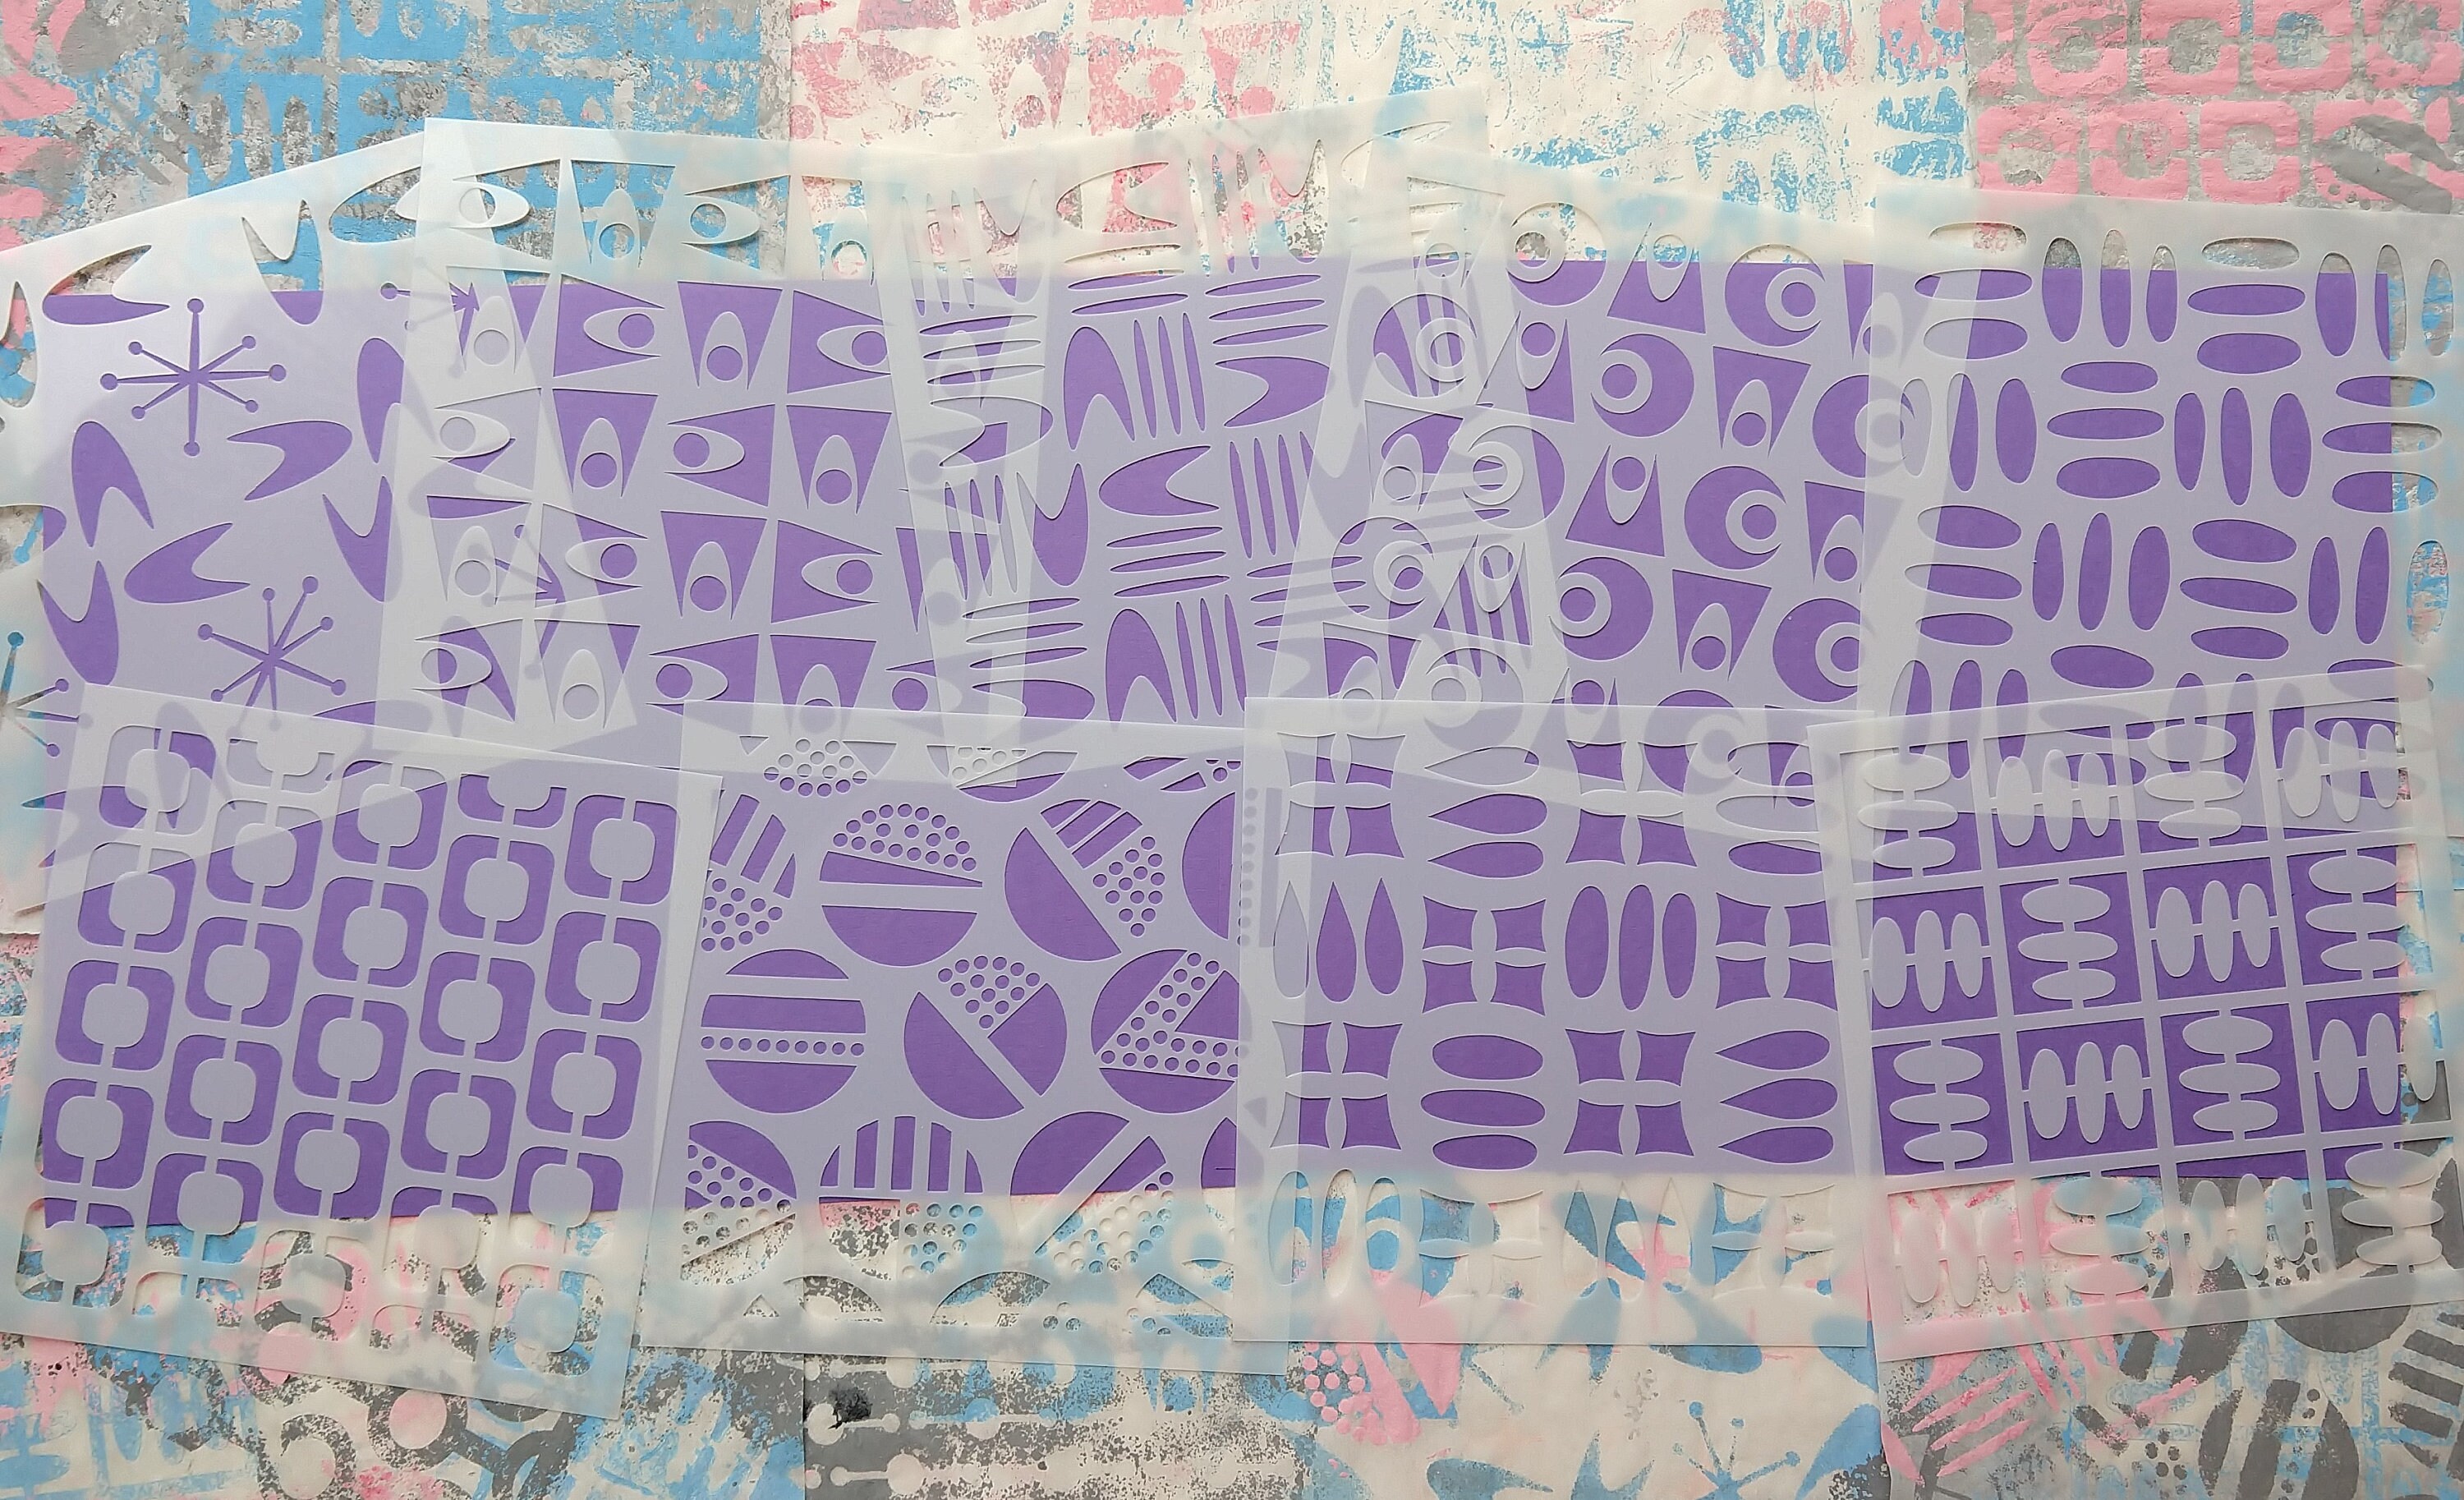 Funky Geometric Stencils for Crafting, Painting, Gelli Prints